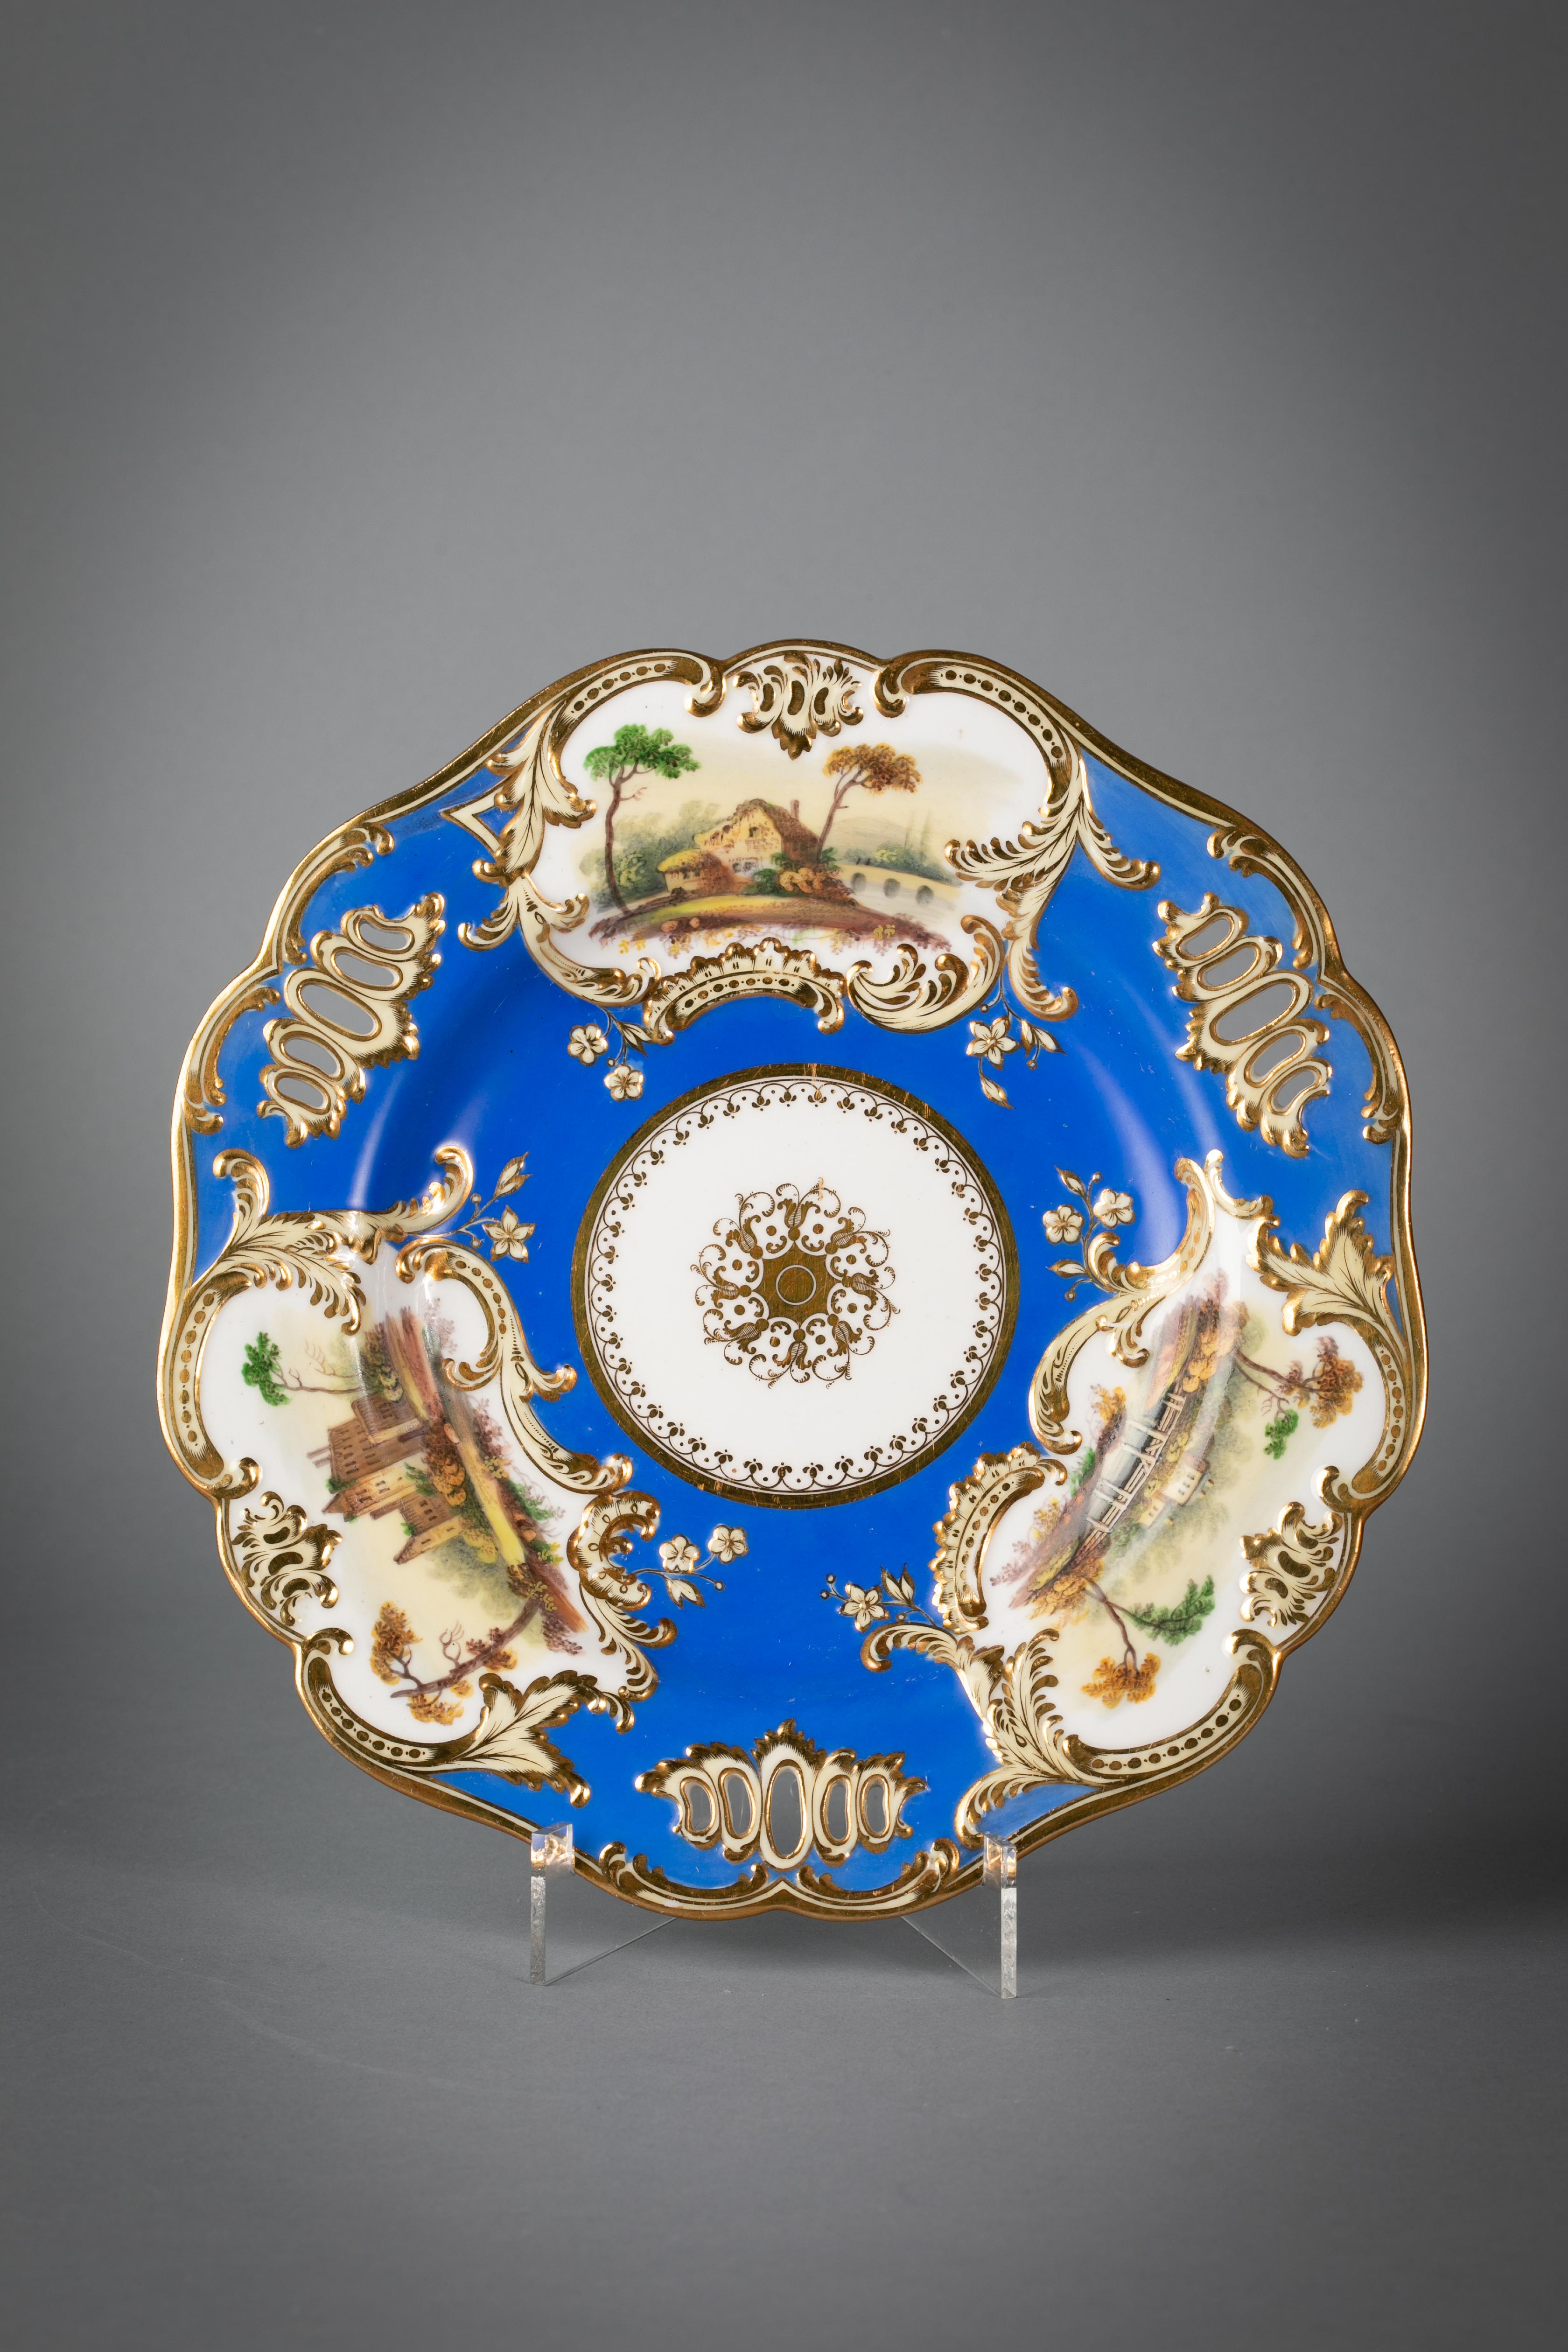 Comprising 24 plates, pair of covered sauce tureens and stands, pair of shell dishes and a pair of rectangular dishes. The bright blue ground interspersed with gilt-edged reticulation and with three rococo-formed cartouches edged in scrolls, molded